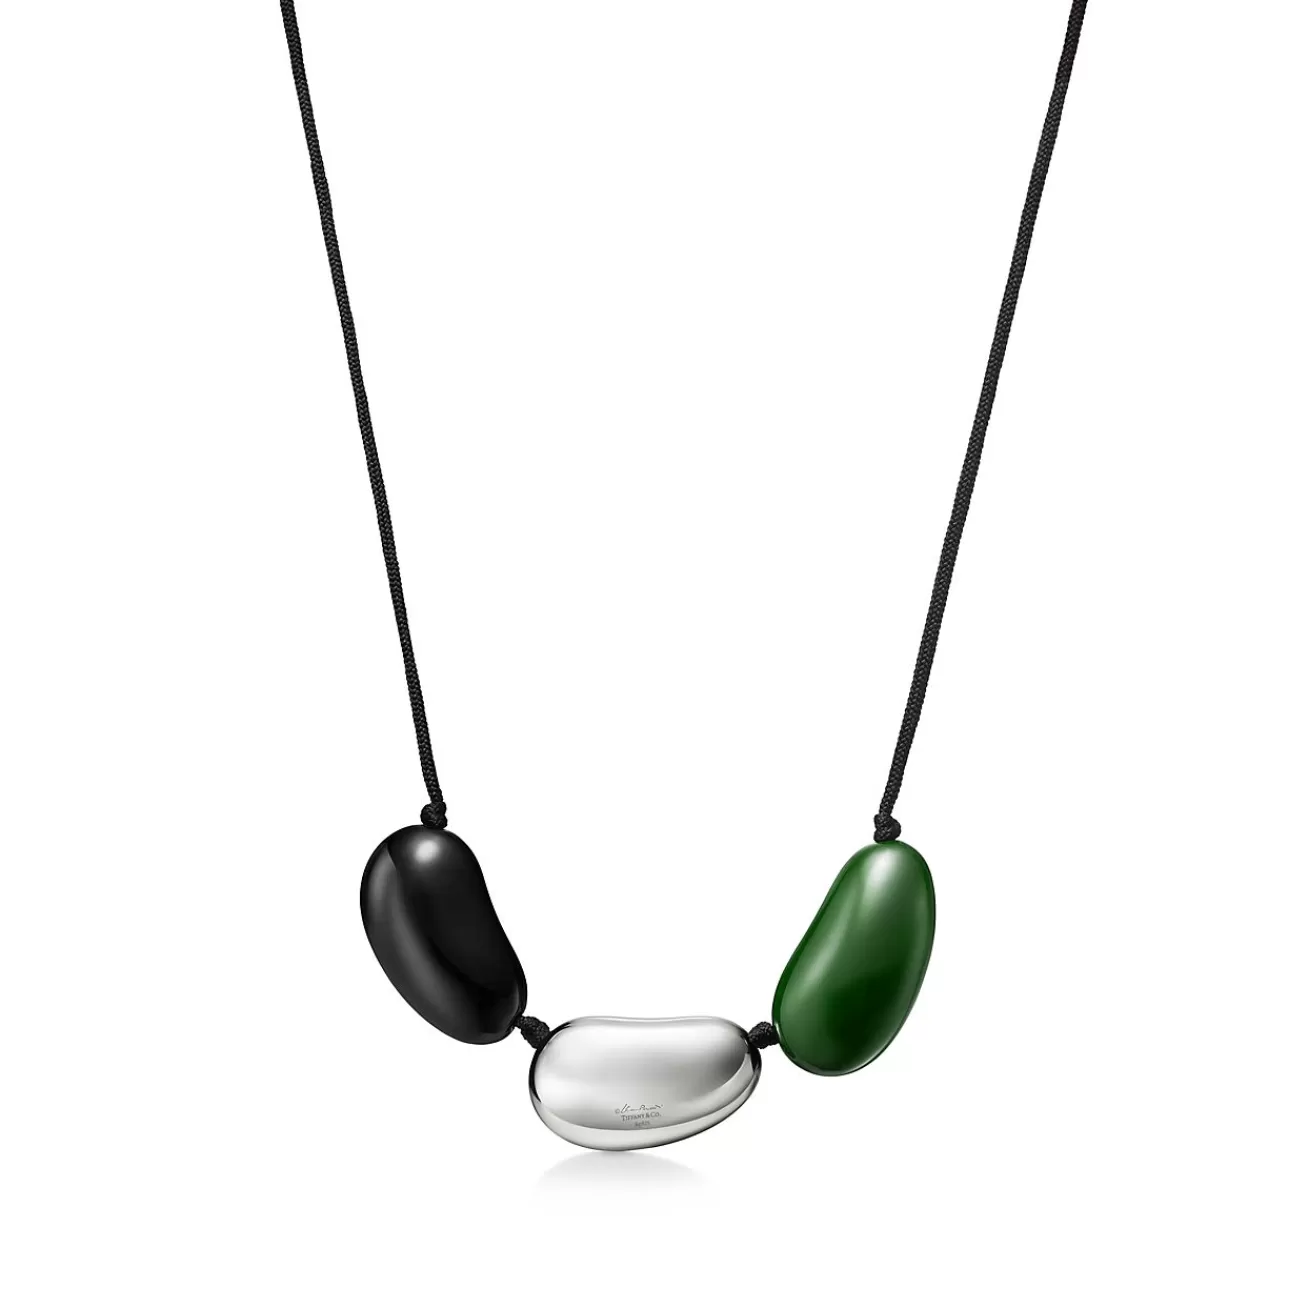 Tiffany & Co. Elsa Peretti® Bean® design Necklace in Silver and Lacquer over Japanese Hardwood | ^ Necklaces & Pendants | New Jewelry